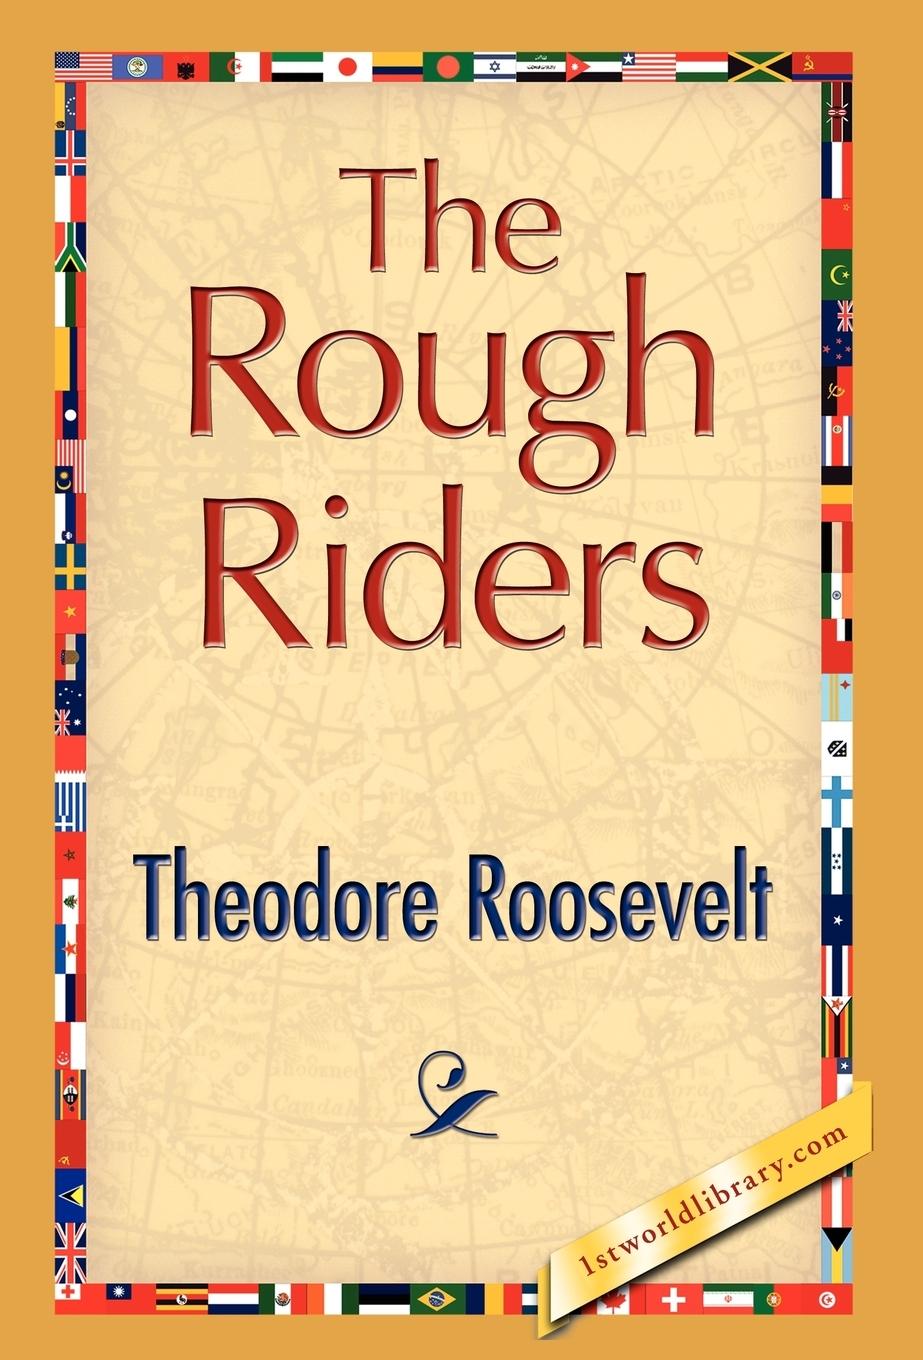 The Rough Riders - Roosevelt, Theodore Iv